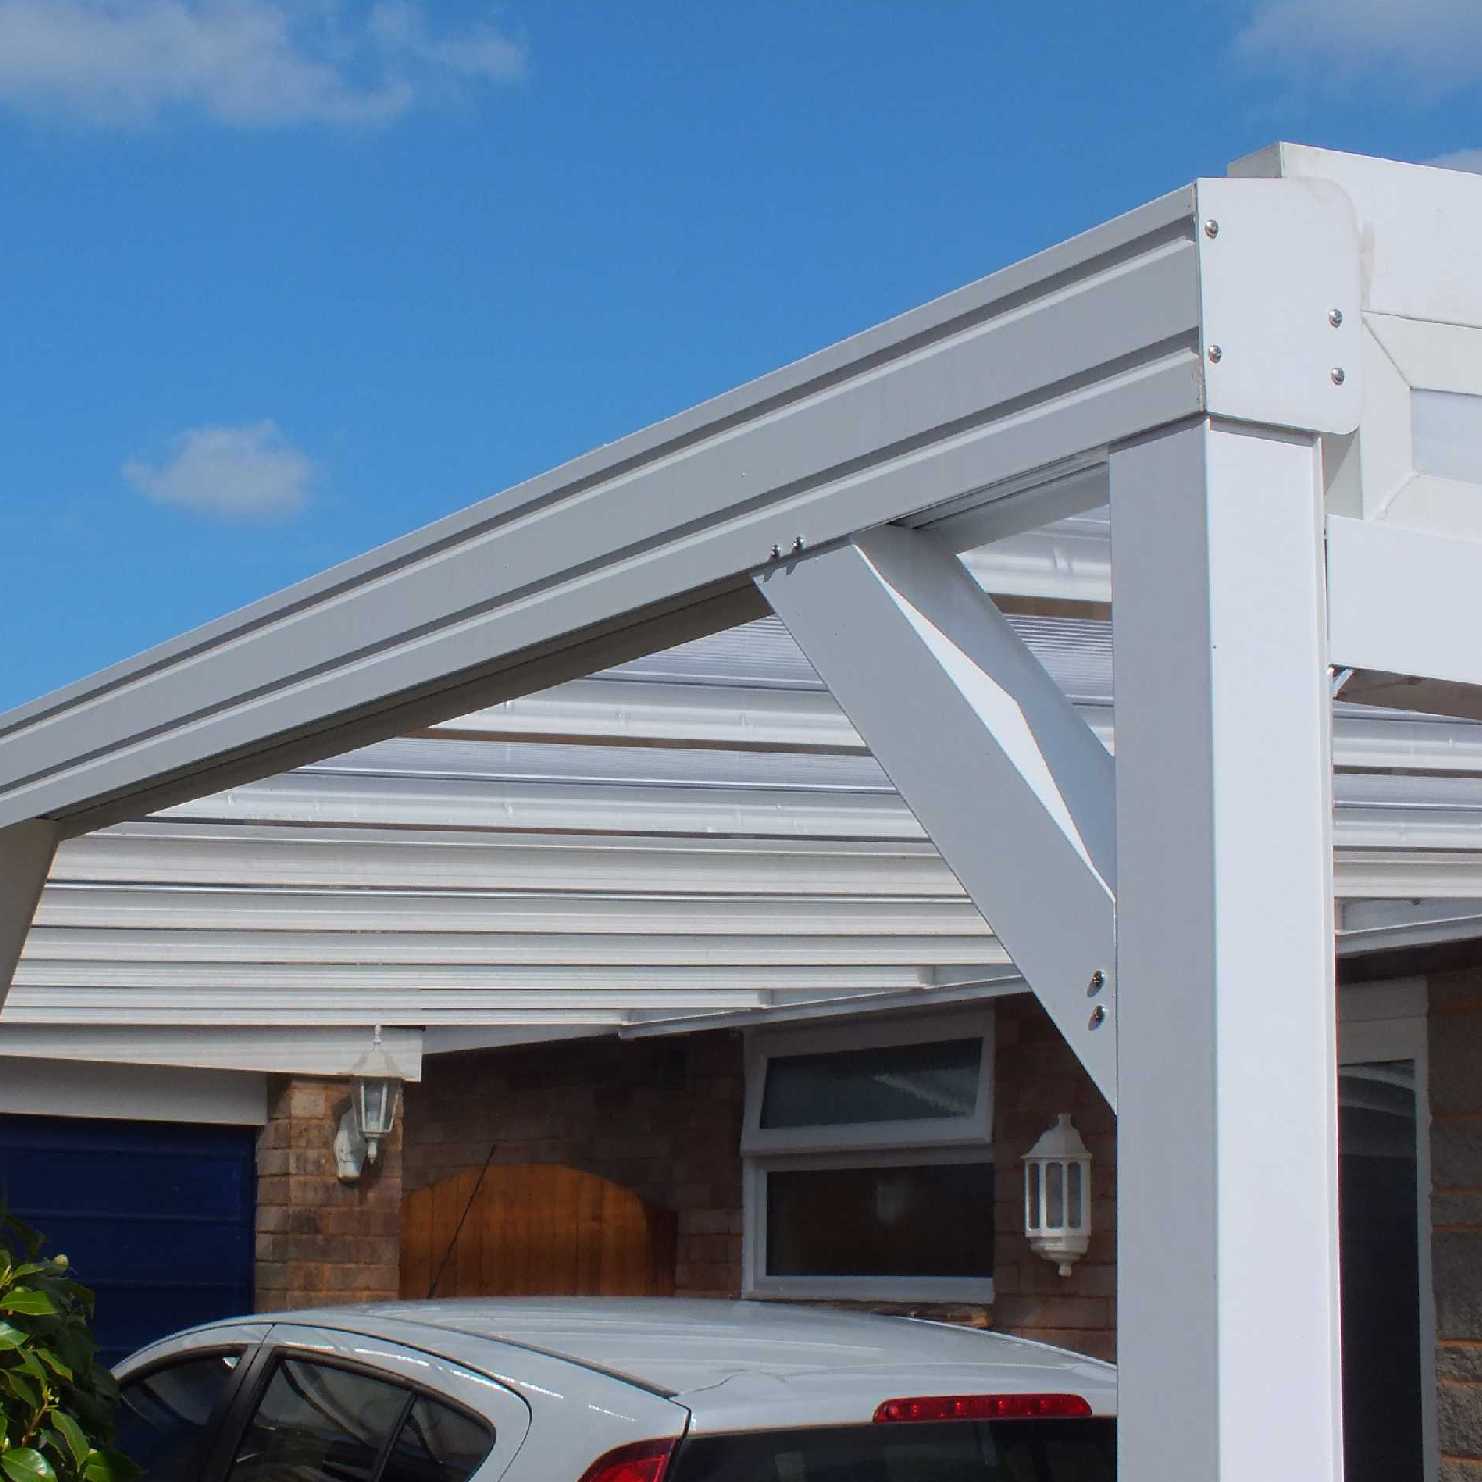 Great deals on Omega Smart Lean-To Canopy, White with 16mm Polycarbonate Glazing - 12.0m (W) x 4.0m (P), (5) Supporting Posts